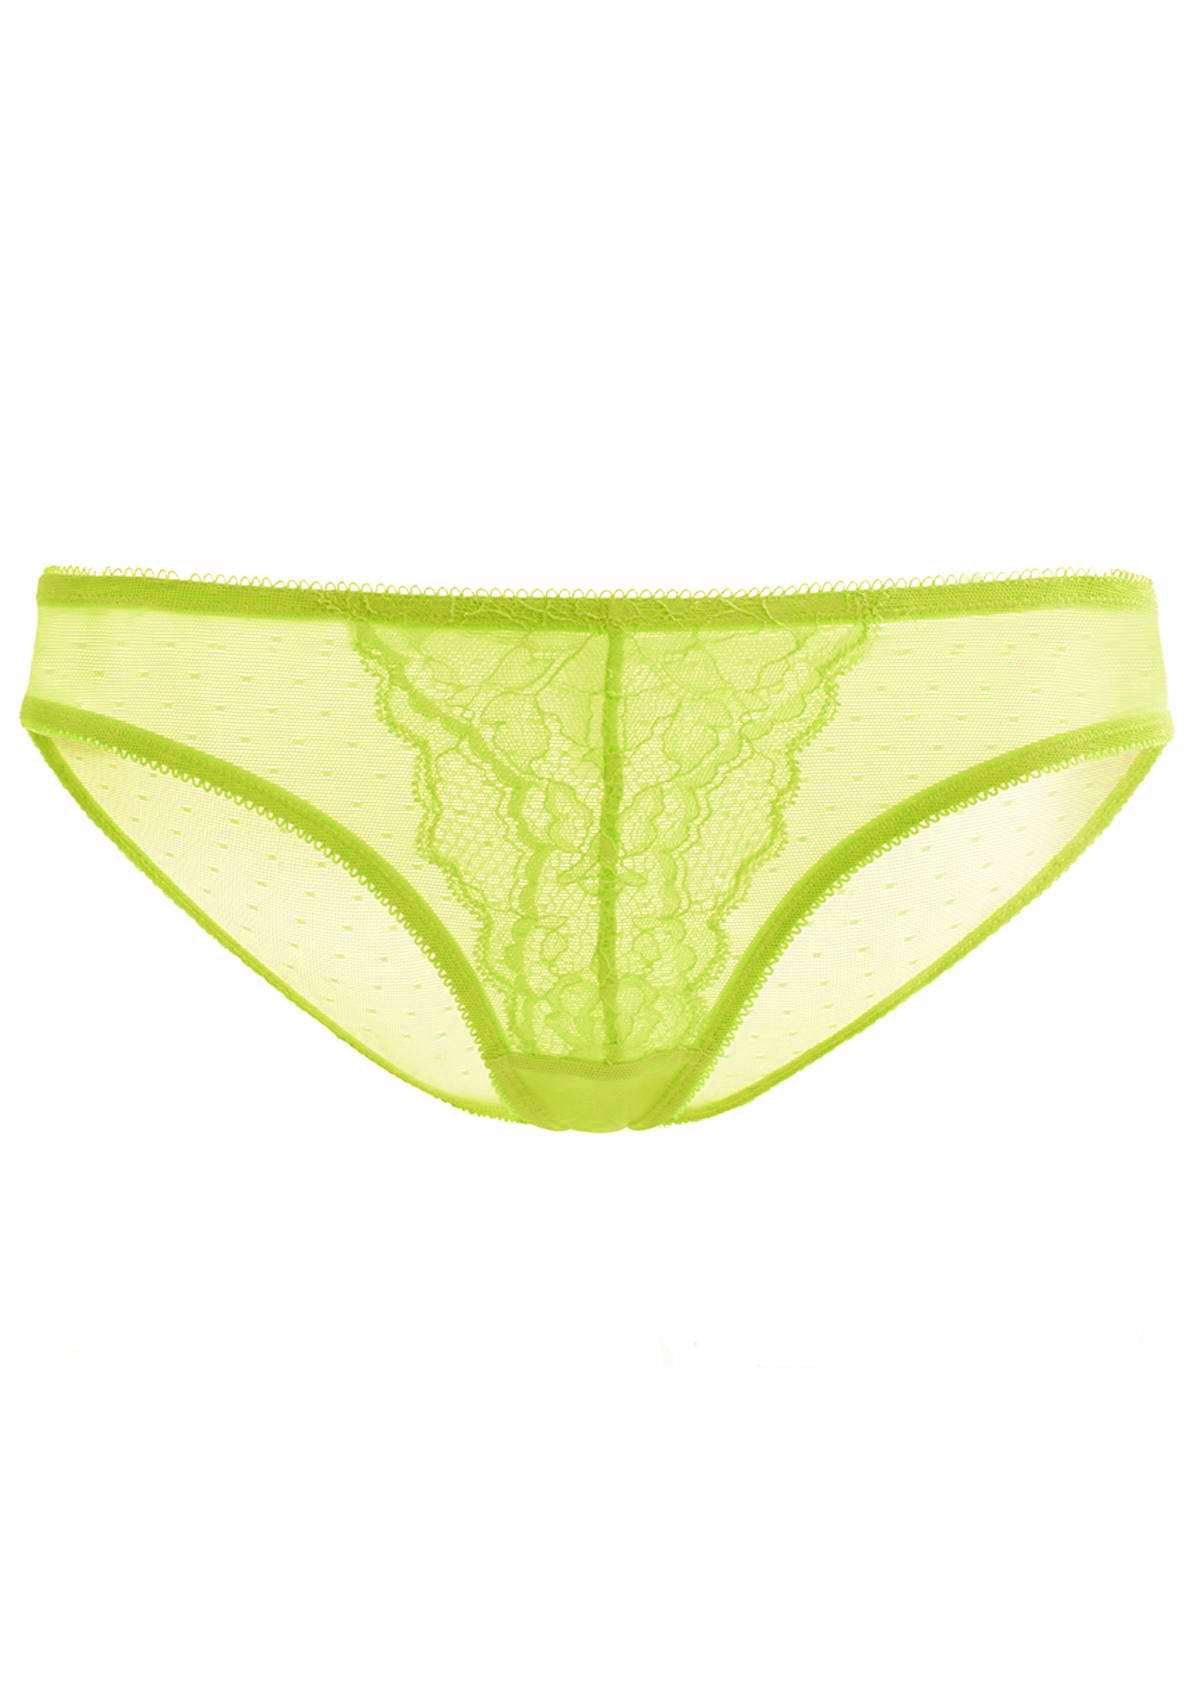 HSIA Enchante Mid-Rise Sheer Lace Mesh Delicate Airy Panty Underwear - XXXL / Lime Green